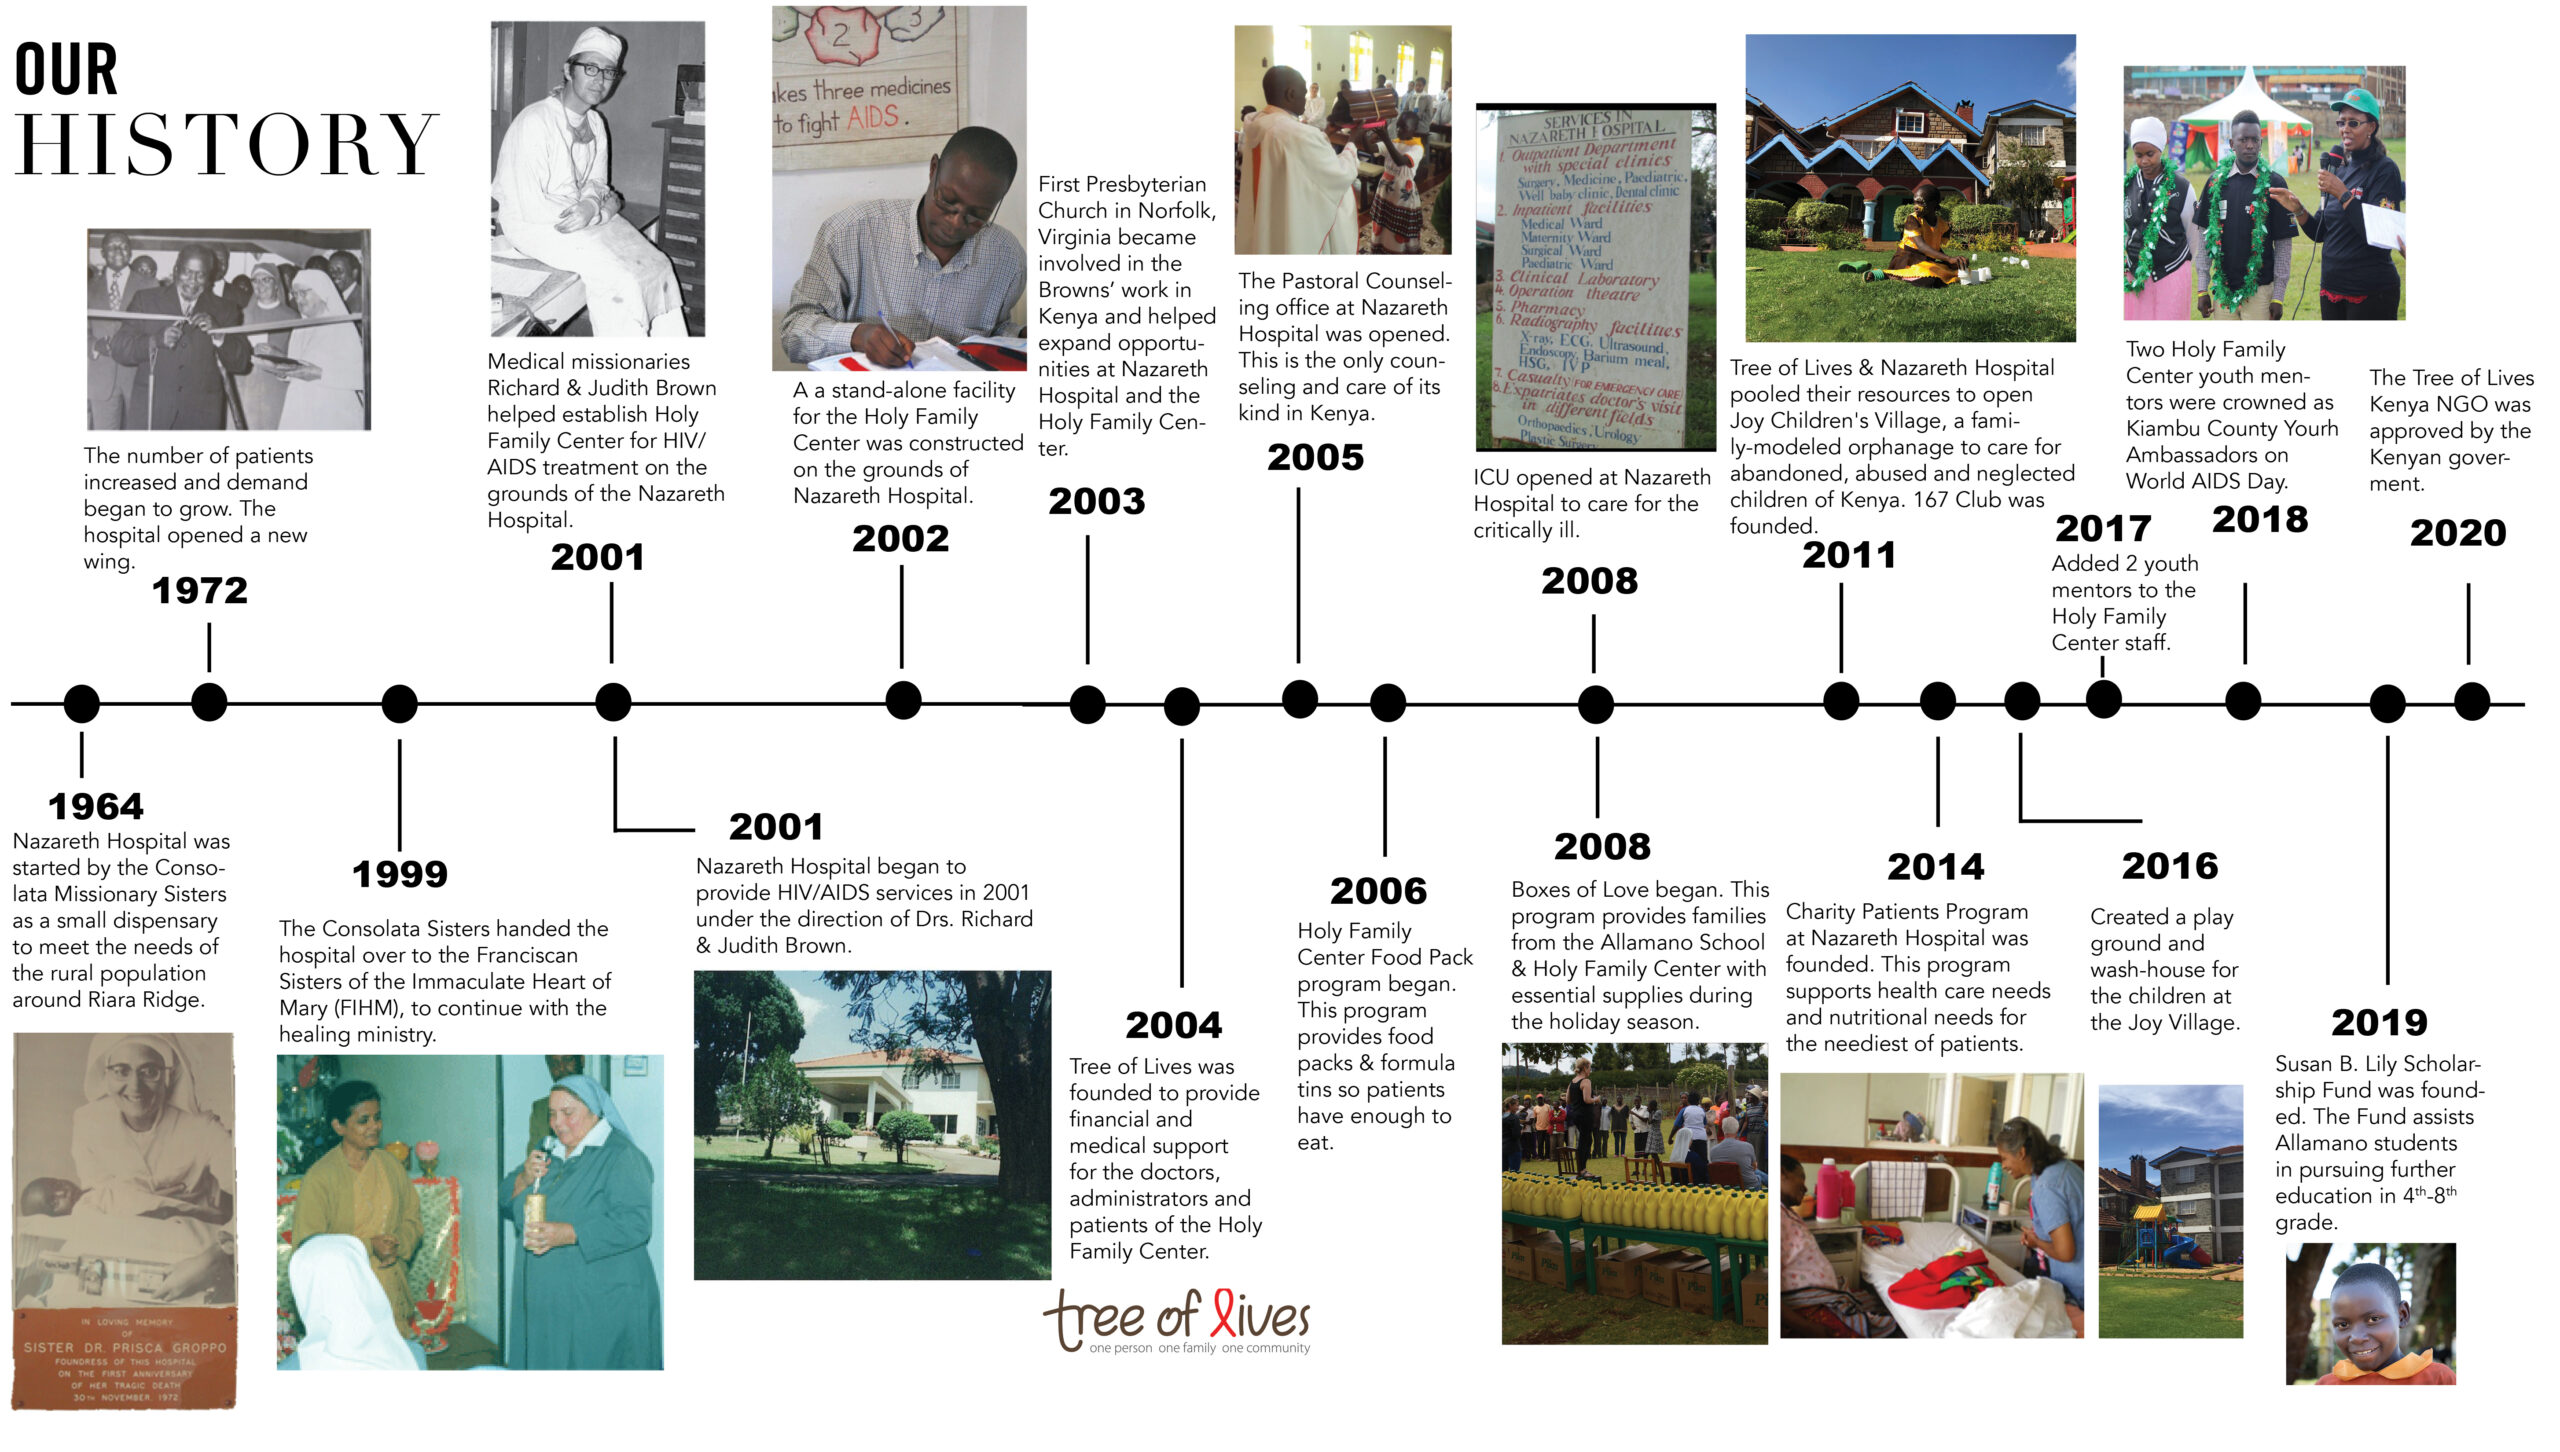 Updated annual report with timeline wide for website